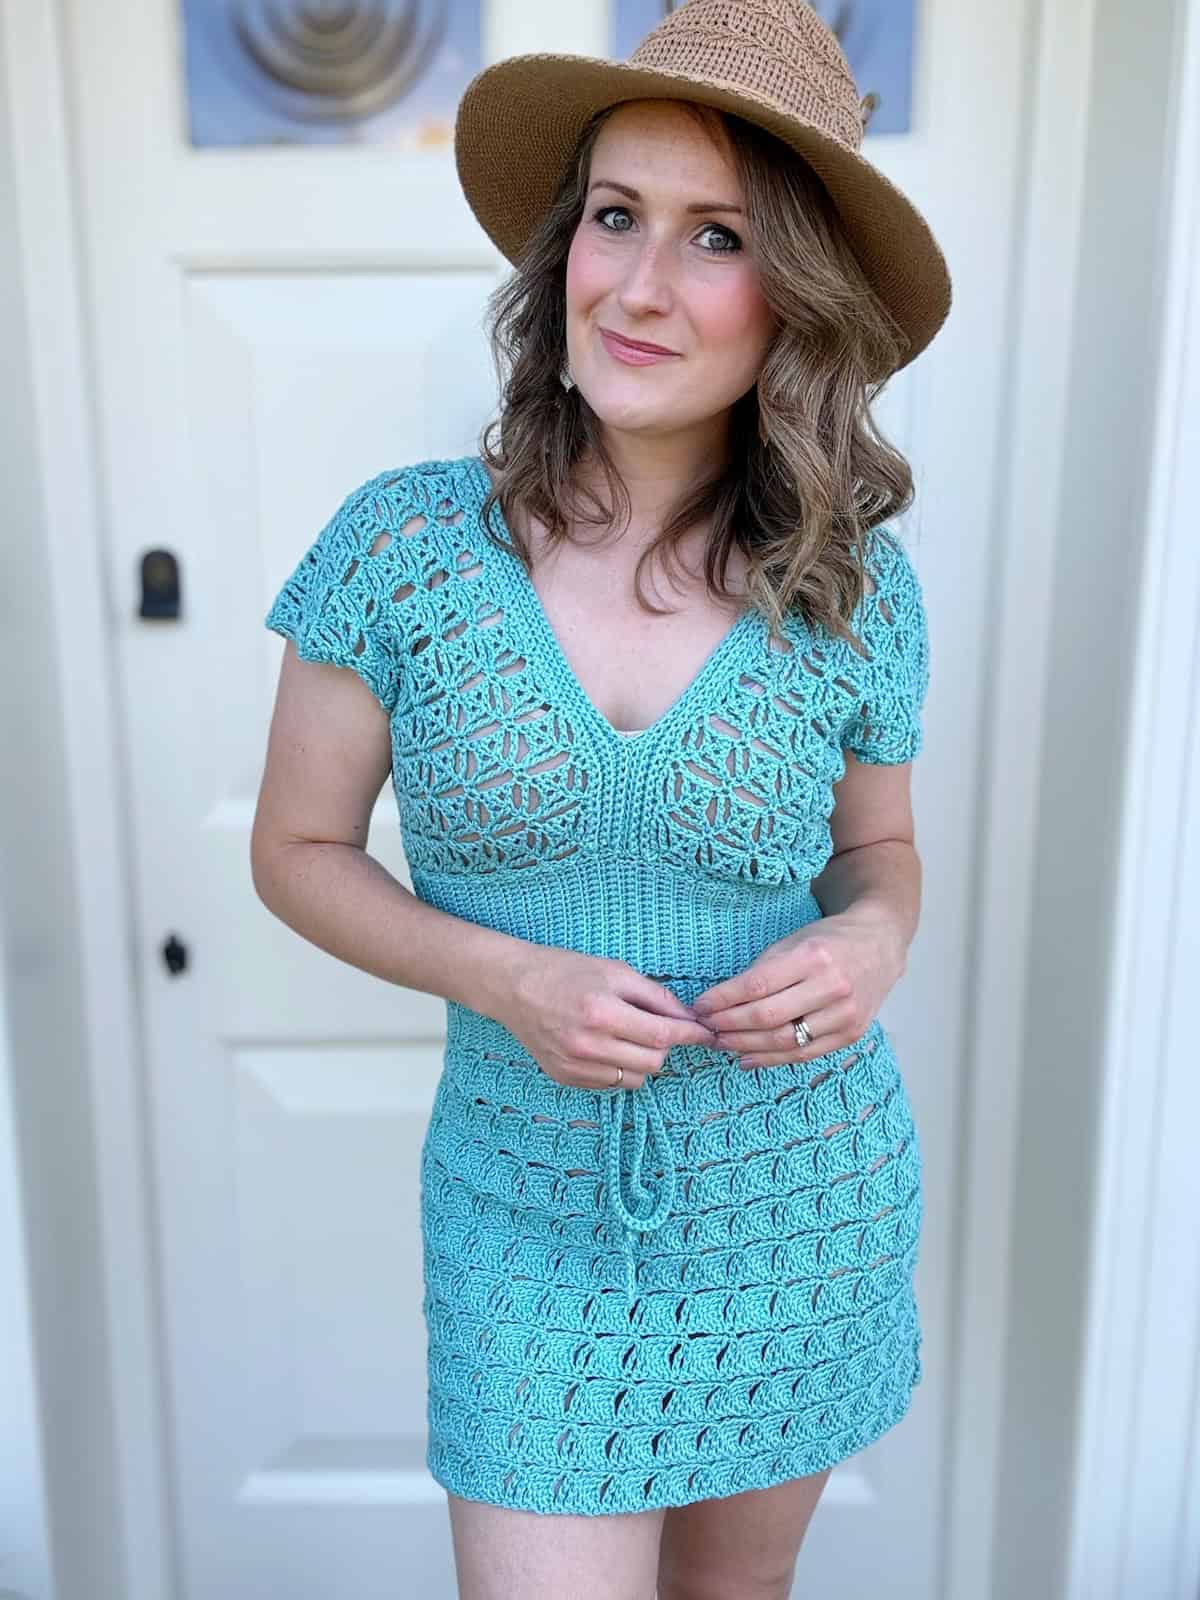 A woman wearing a light blue crochet skirt with top and a brown hat stands in front of a white door, looking at the camera with a slight smile.